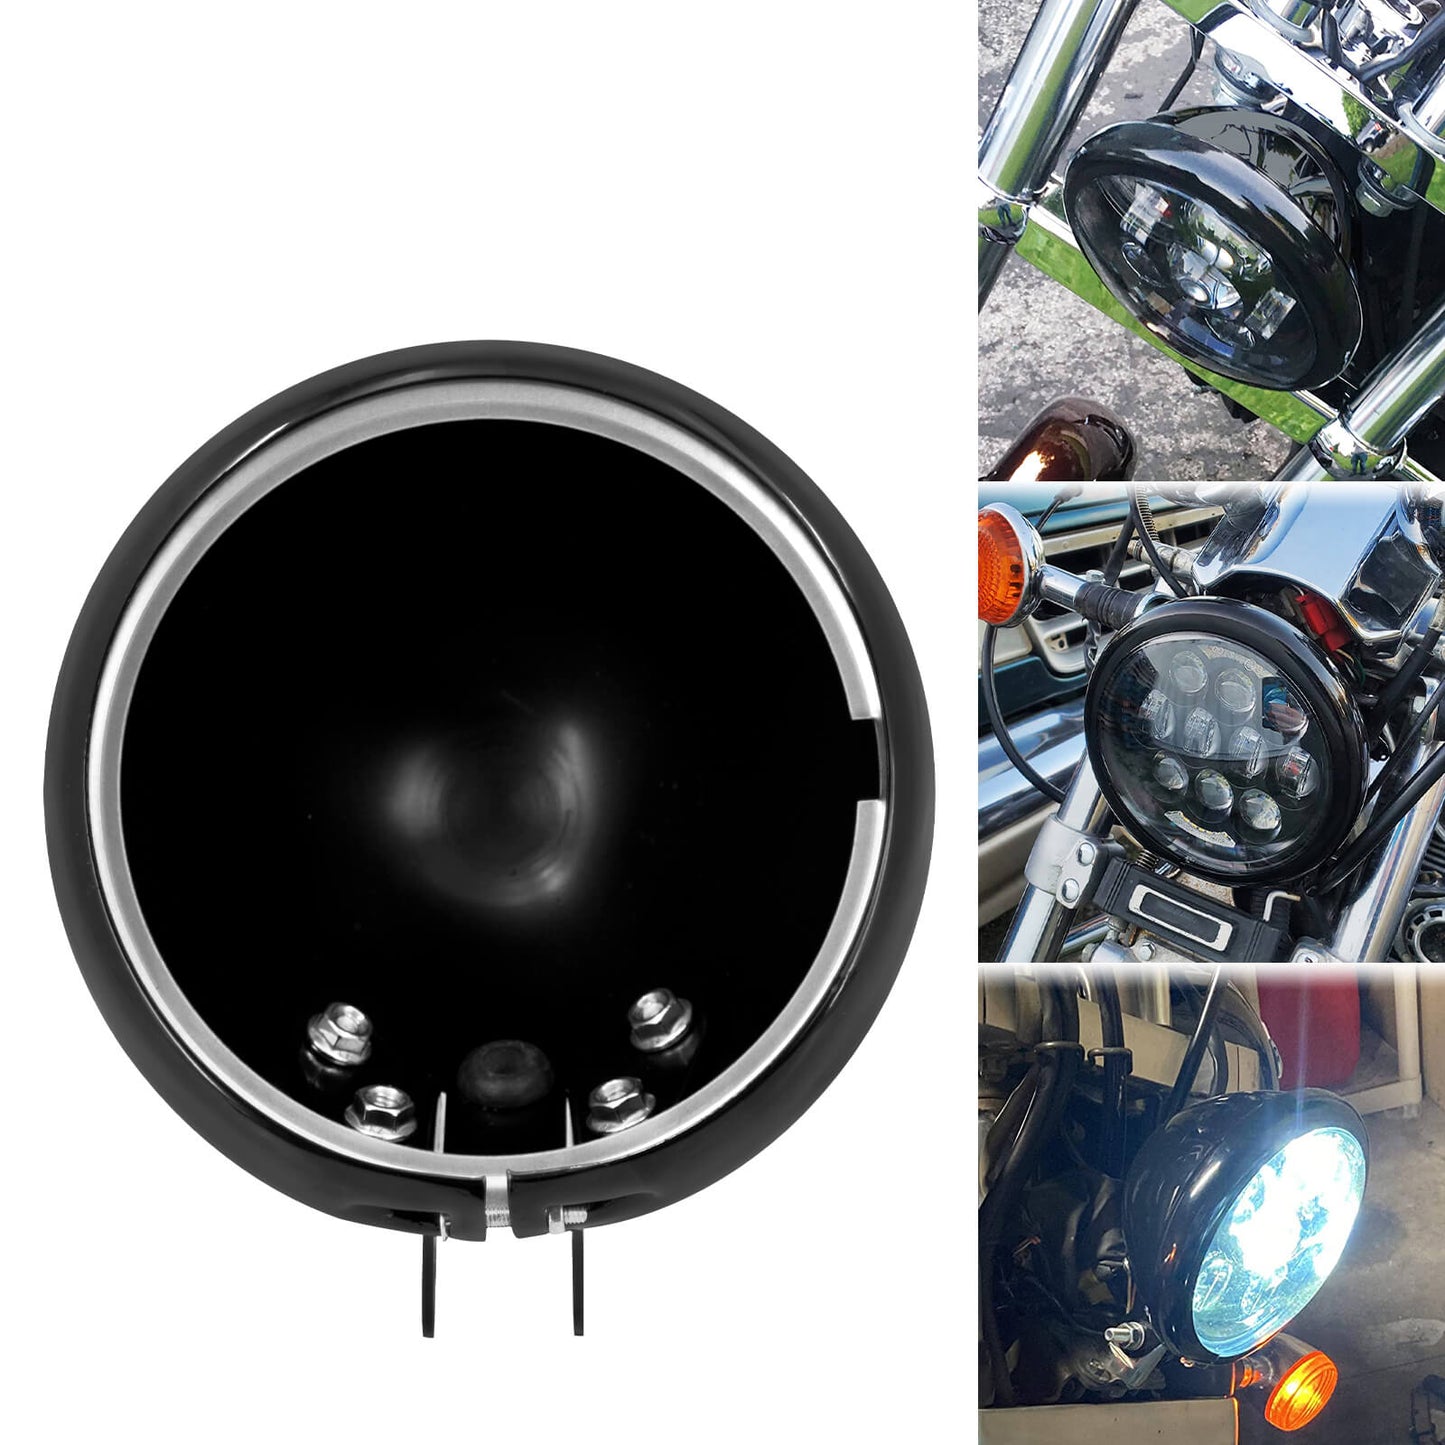 5.75" Headlight Cover Black Housing Fit For Sportster Softail Dyna | Mactions